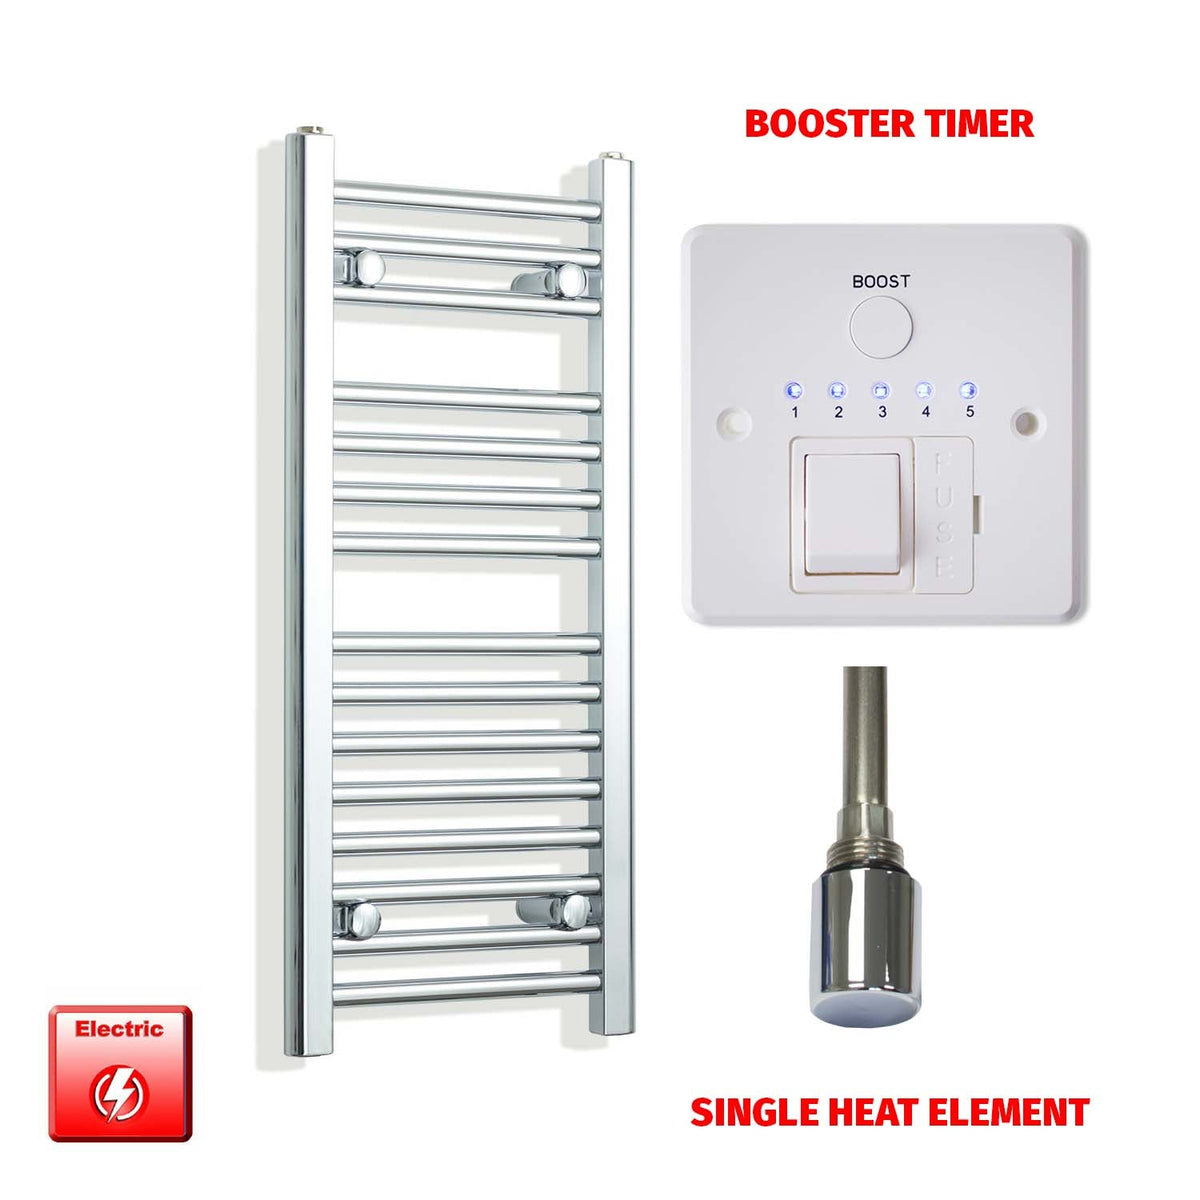 800mm High 350mm Wide Pre-Filled Electric Heated Towel Rail Radiator Straight Chrome Single heat element Booster timer